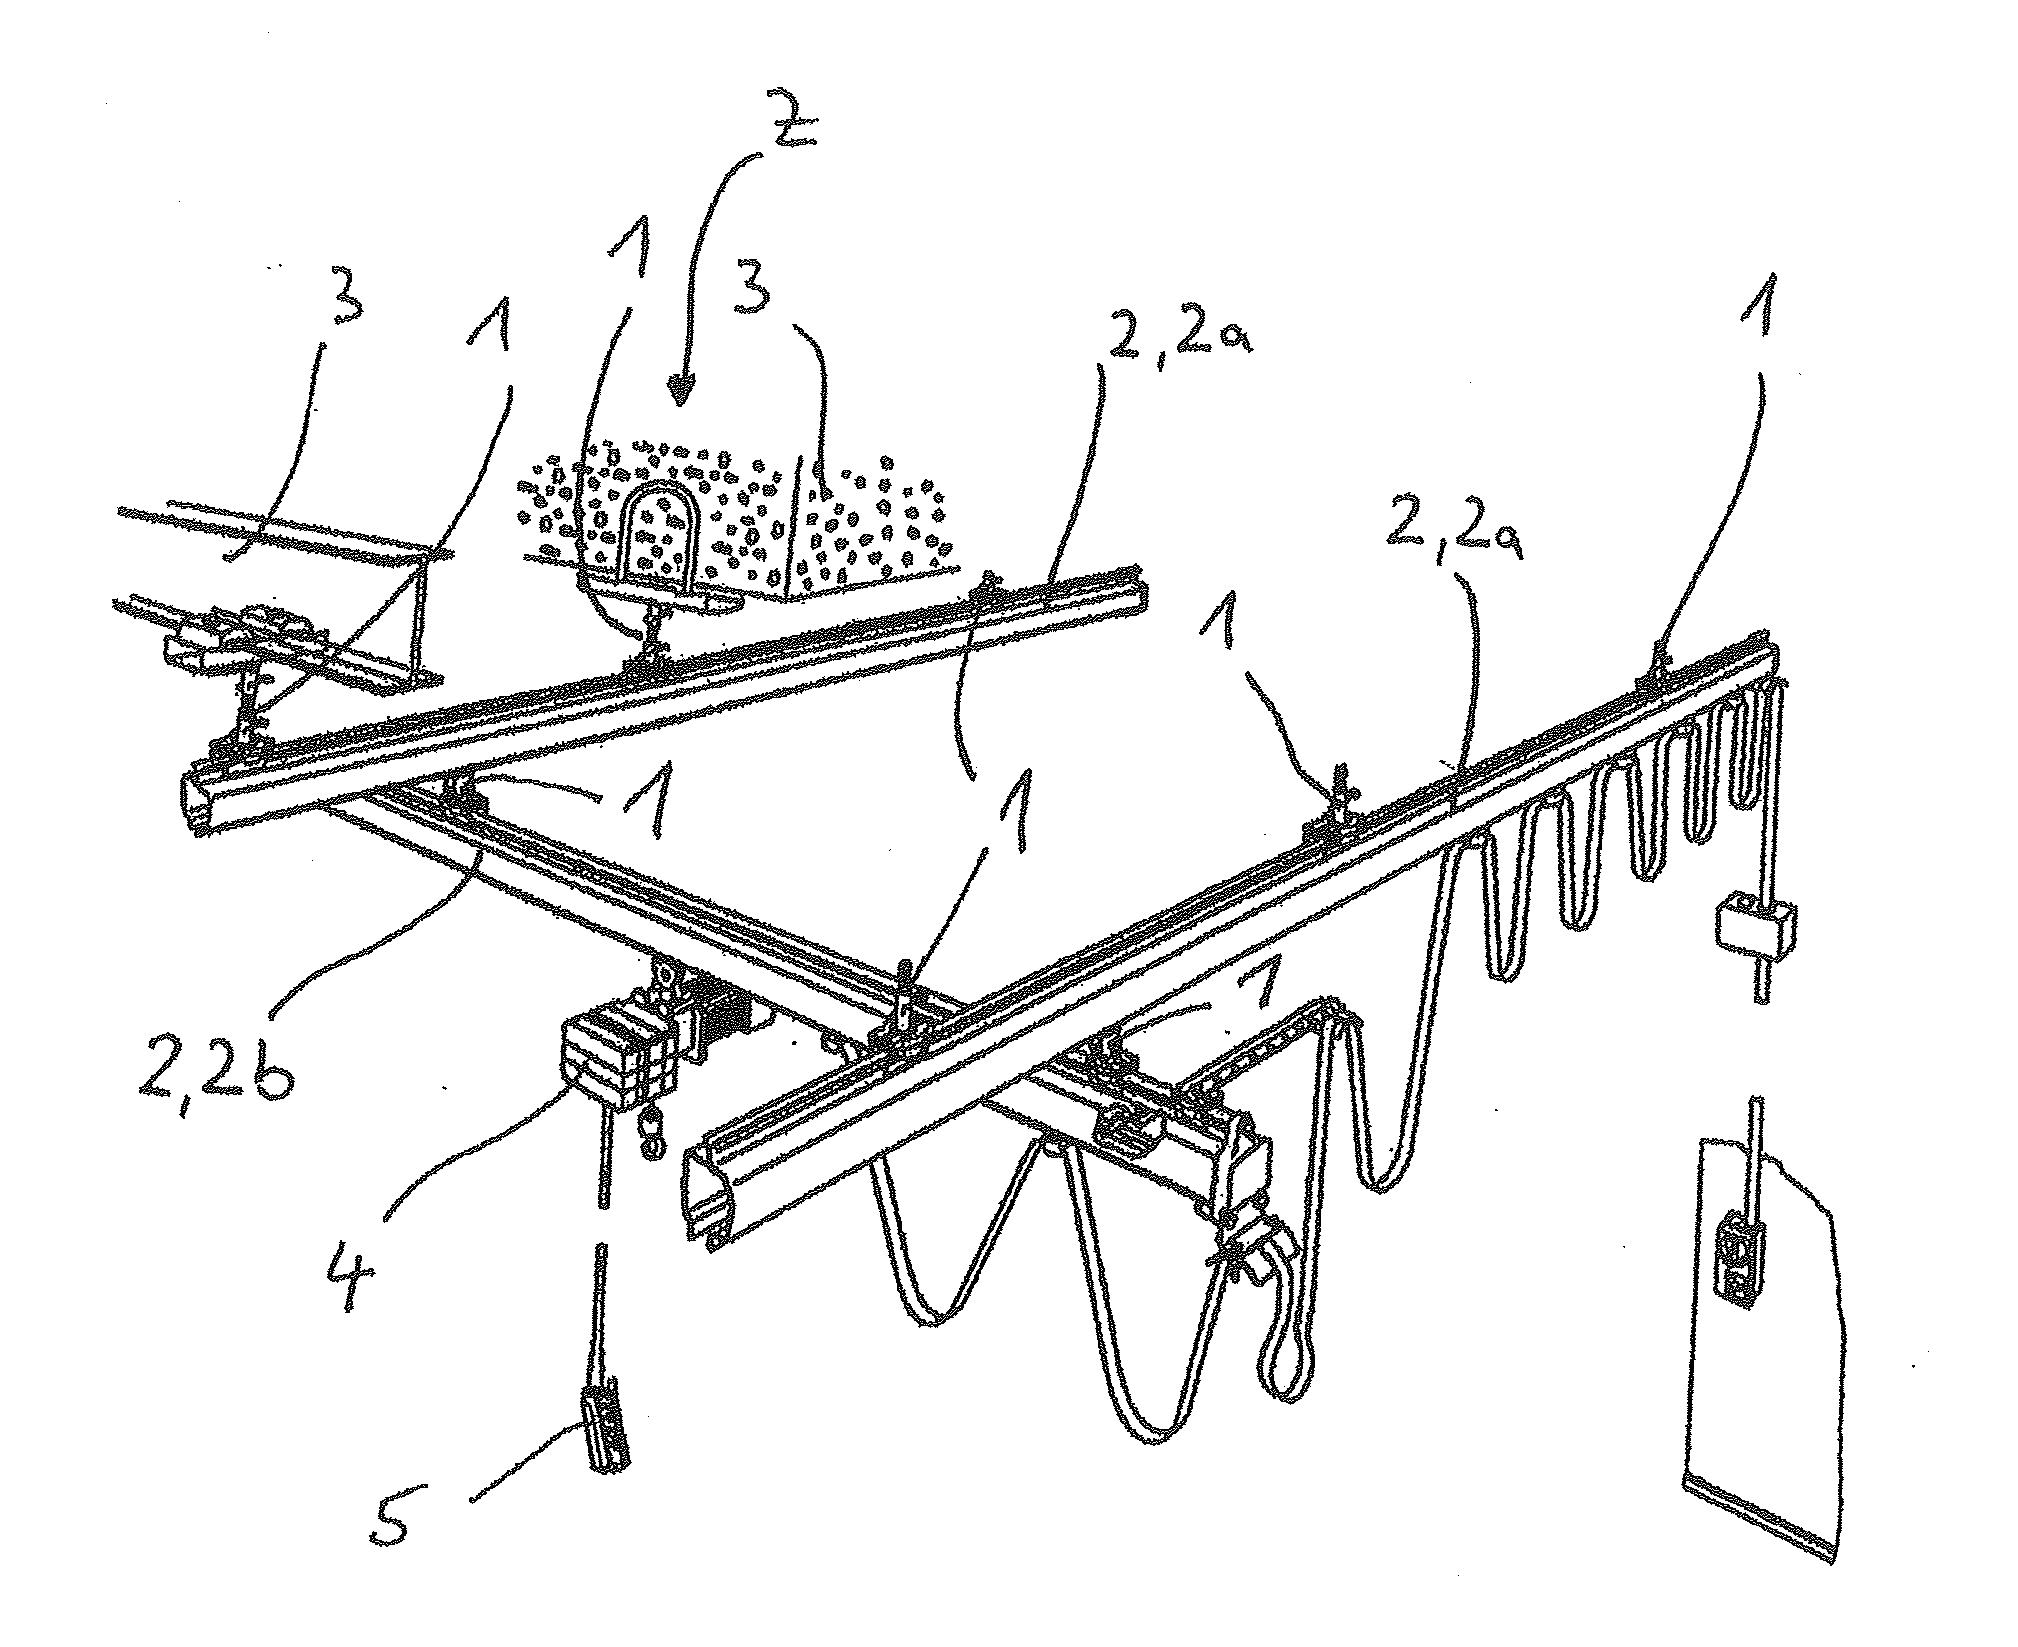 Device for suspending a rail, in particular a rail of an overhead conveyor or lifting gear